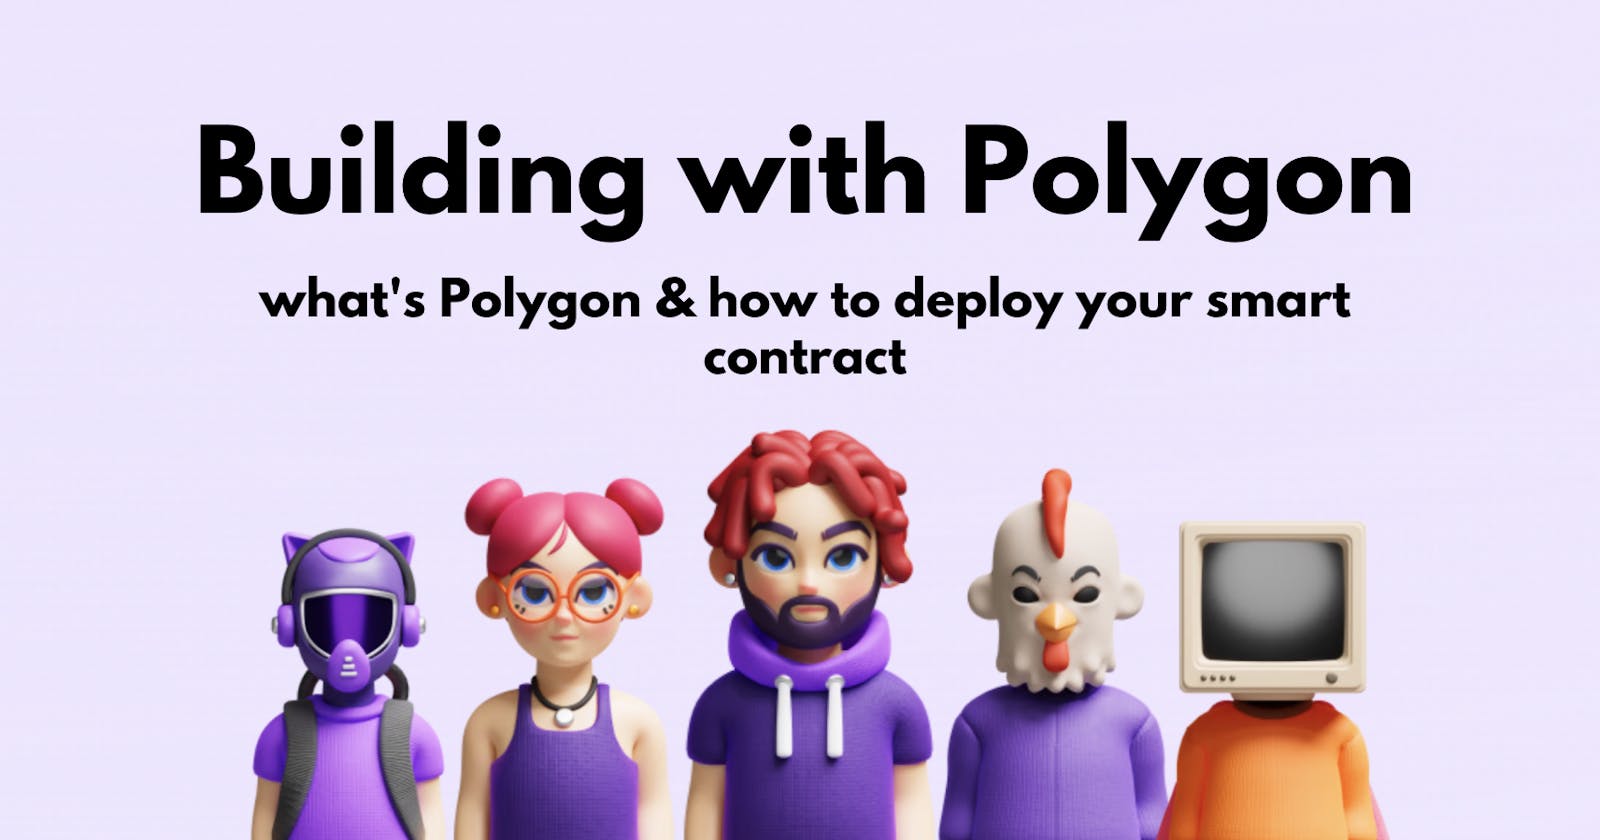 Building with Polygon